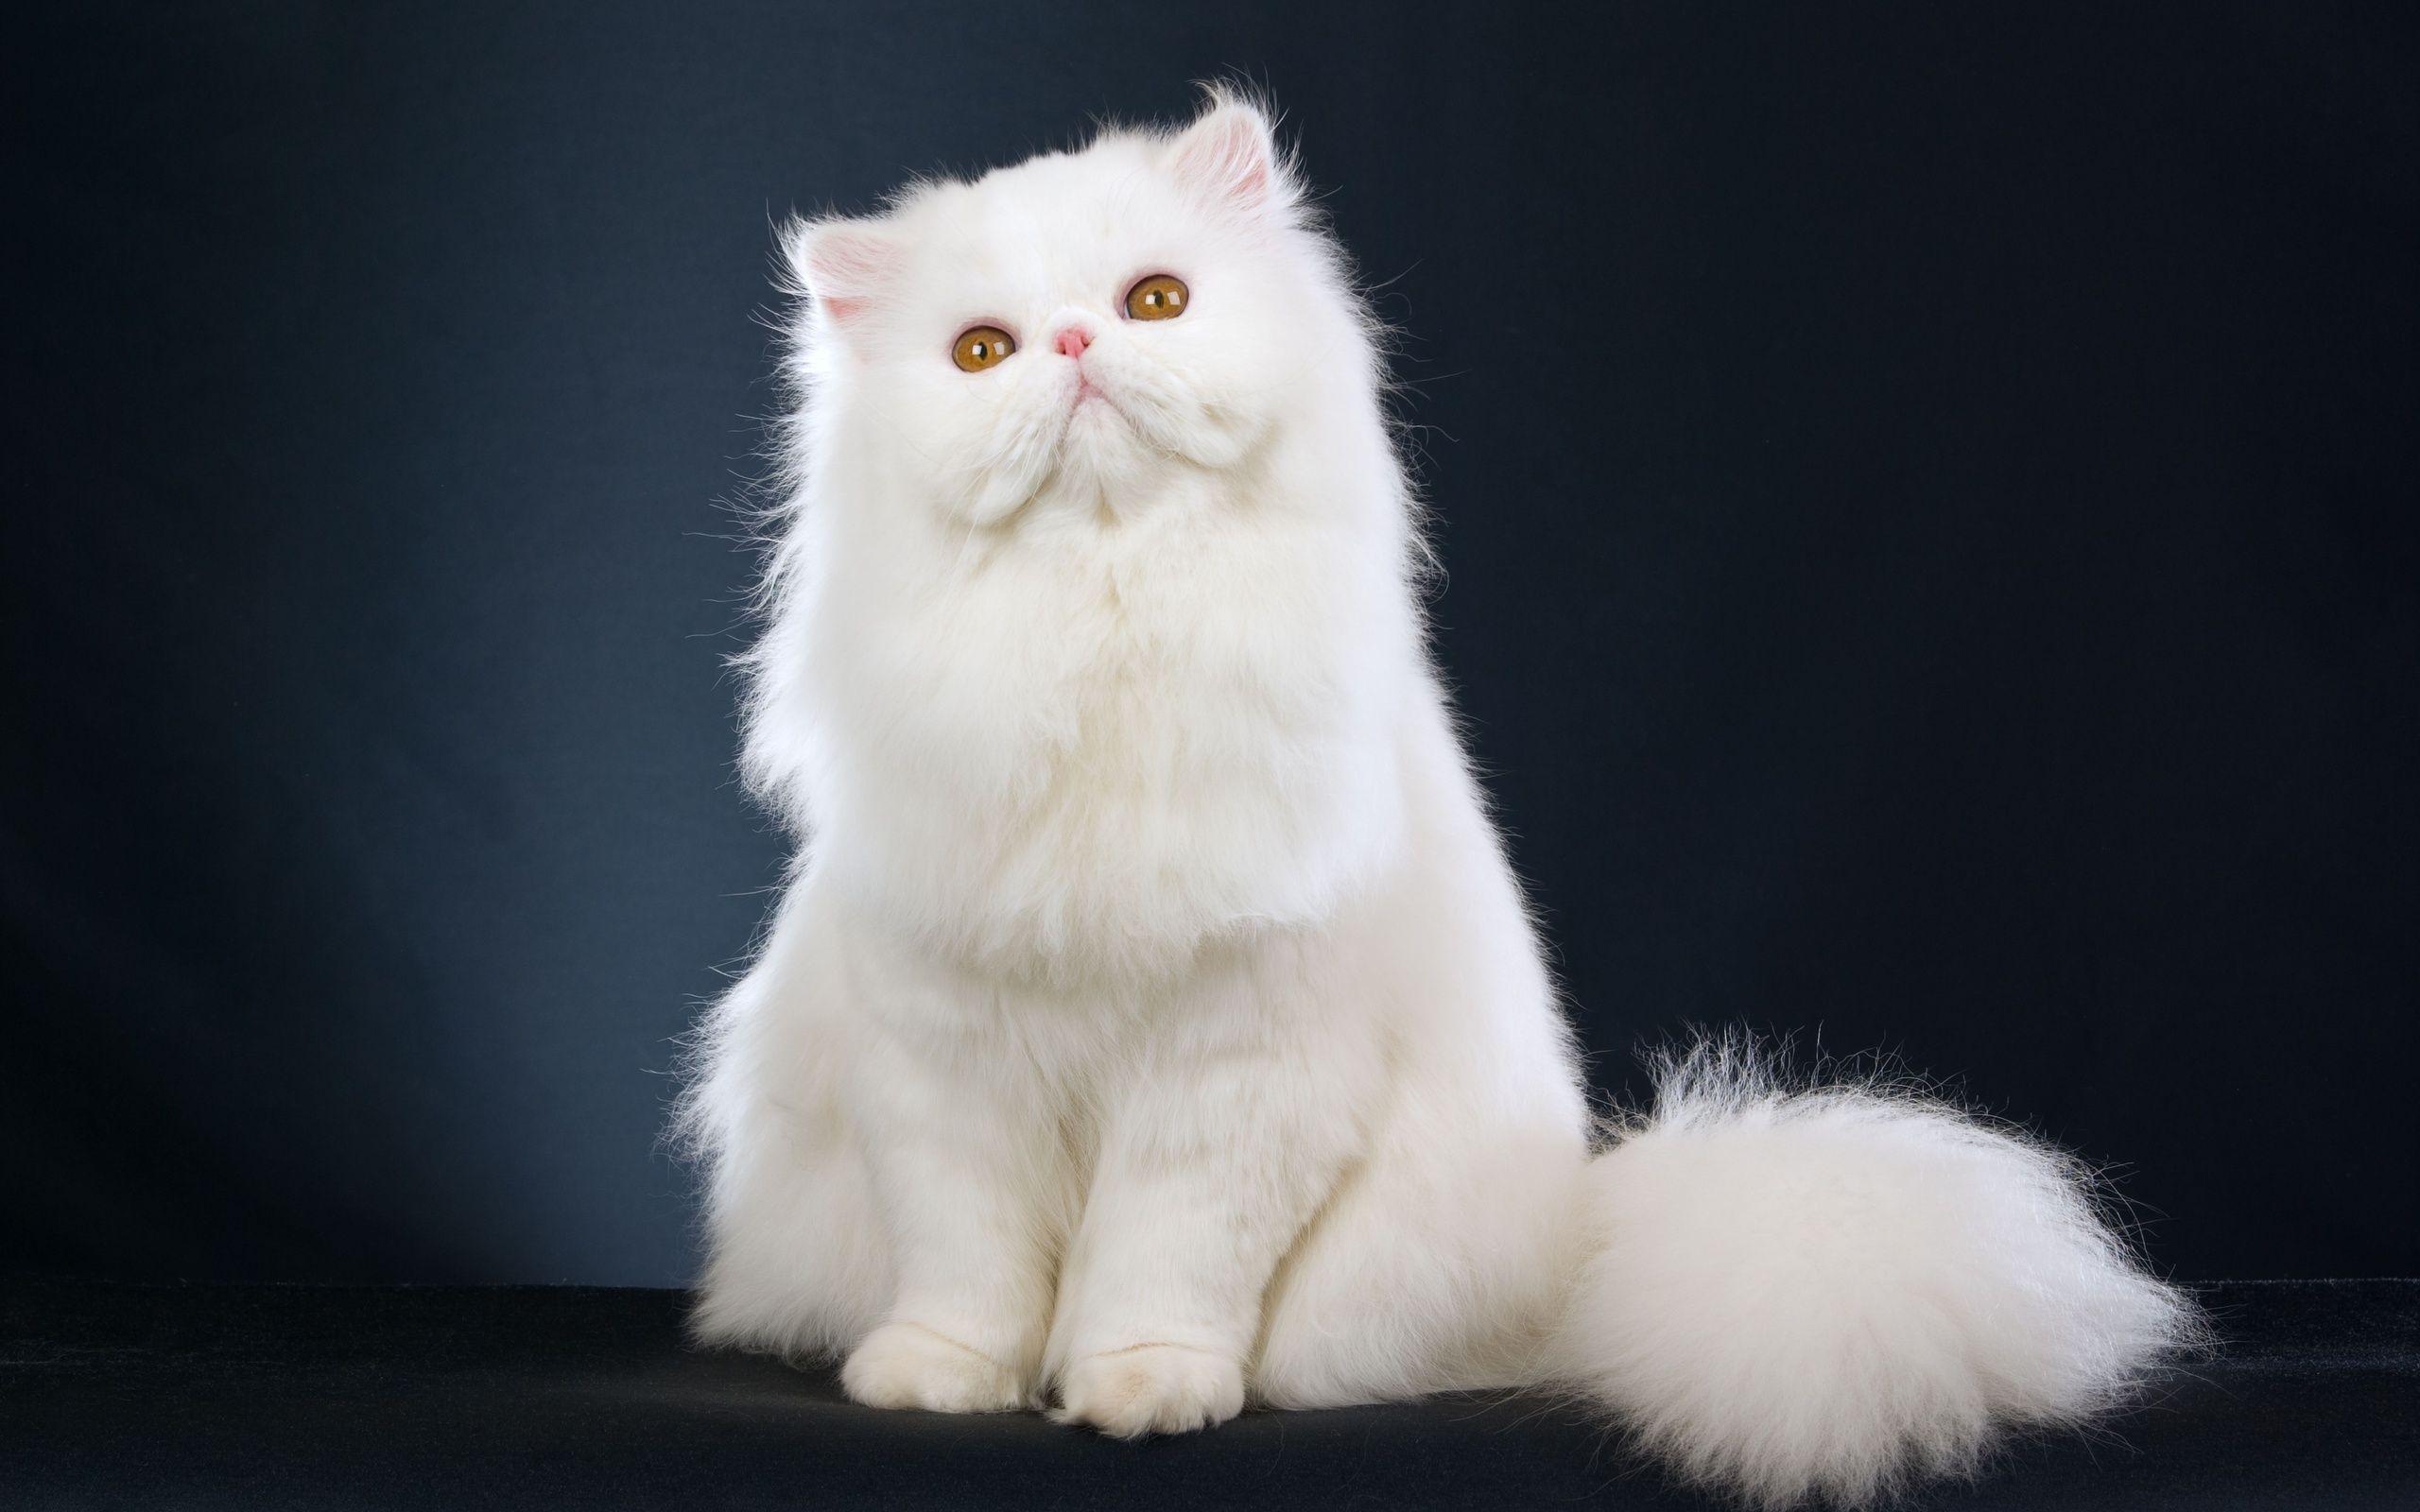 Pure White Cat, HD Resolutions, Wide Resolutions, And Dark